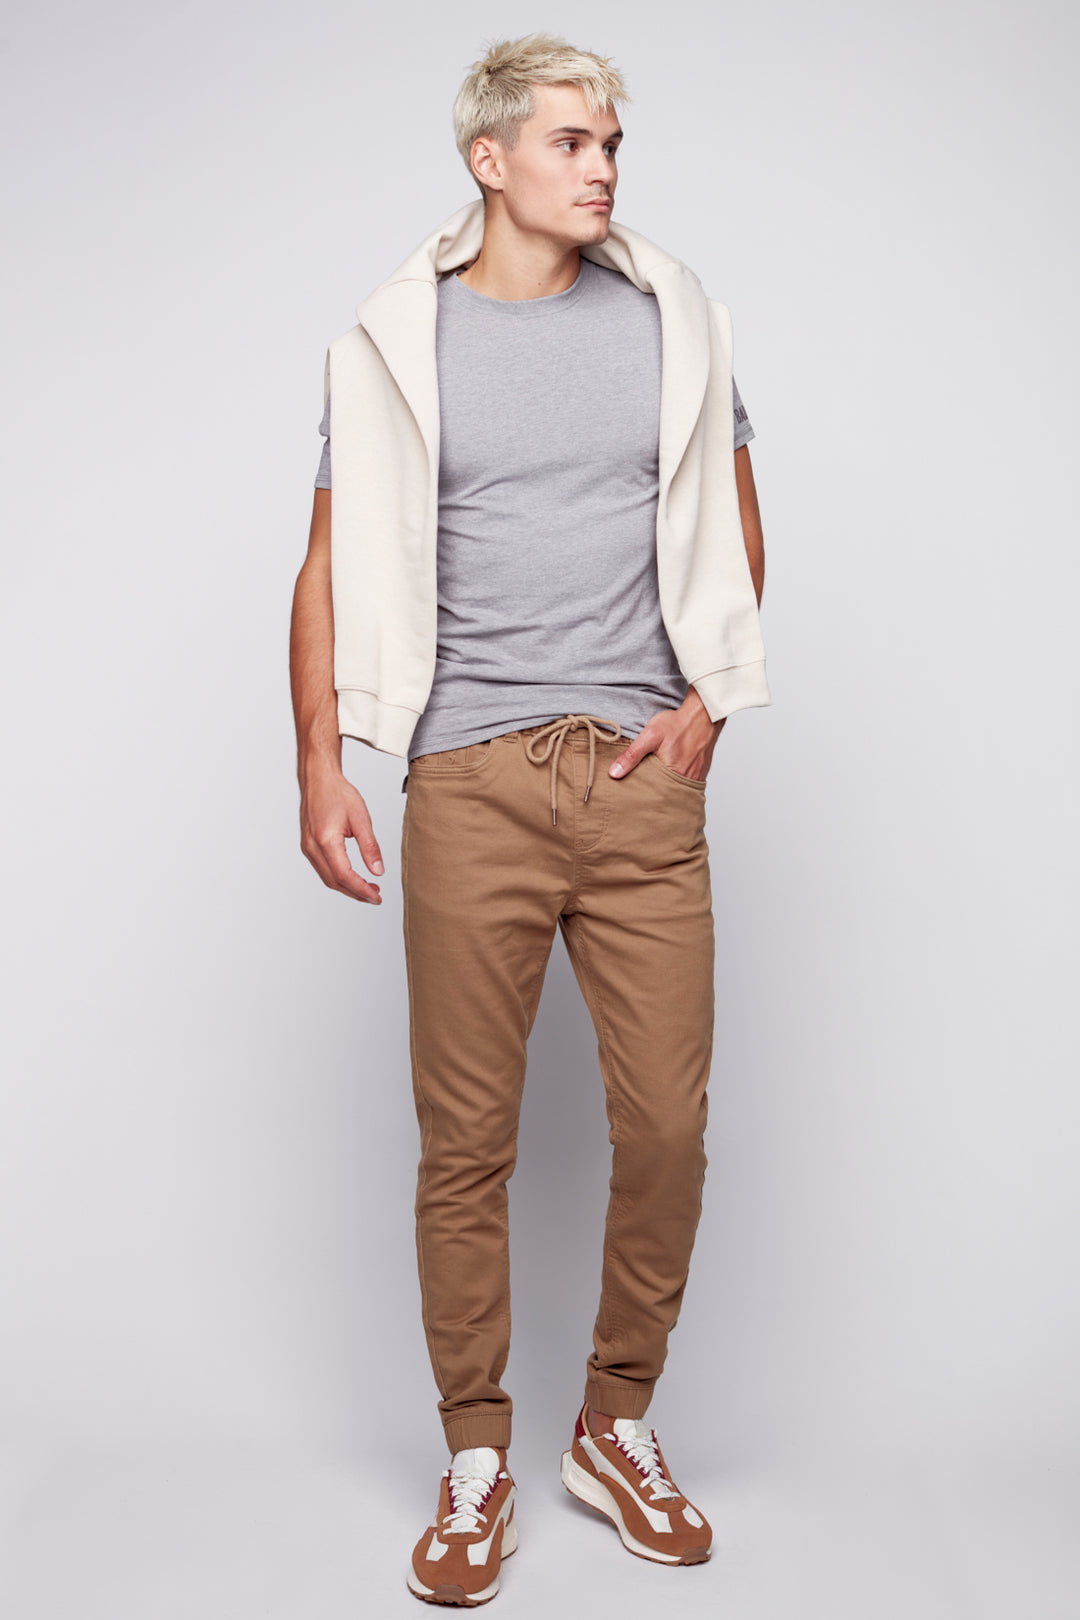 JAGGER - Jogger Classique 5 Poches French Terry - Beige